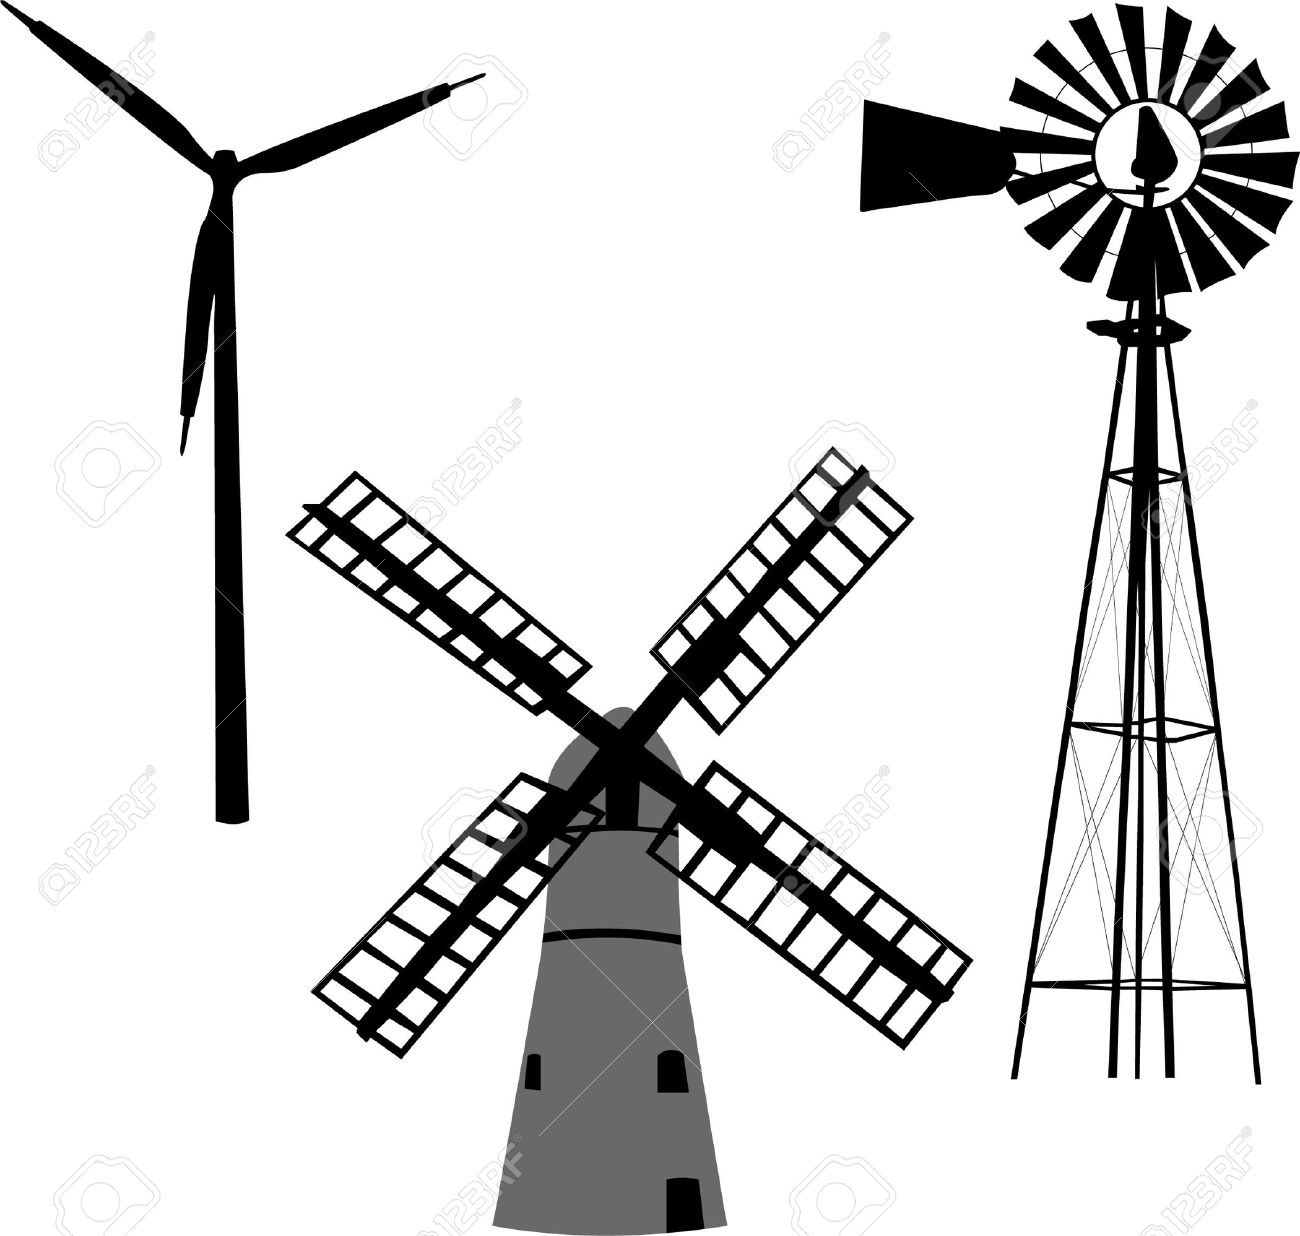 silhouette of windmill.